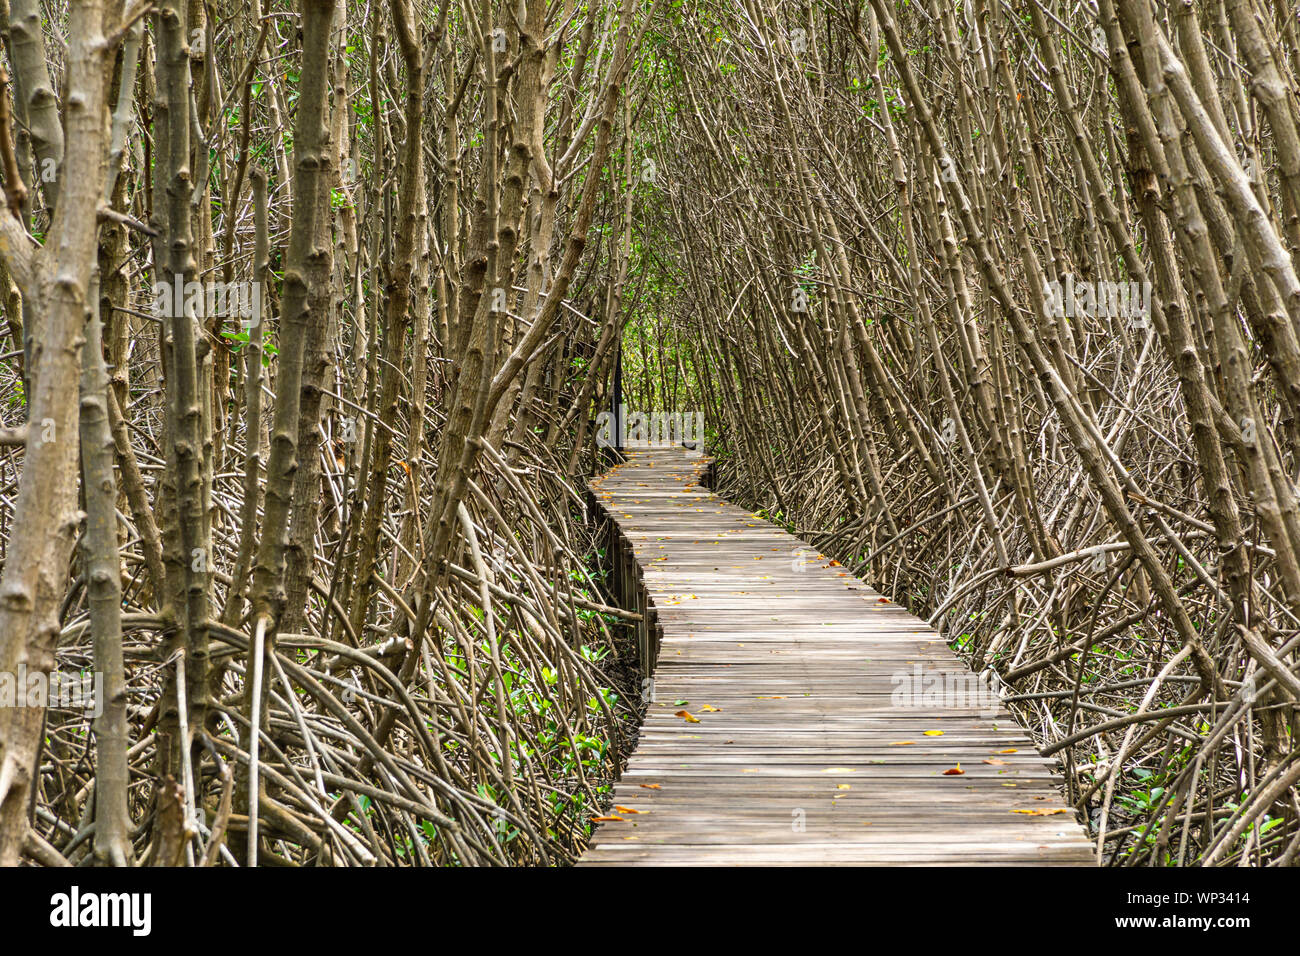 A Long wooden pathway in Mangrove forest background. Stock Photo